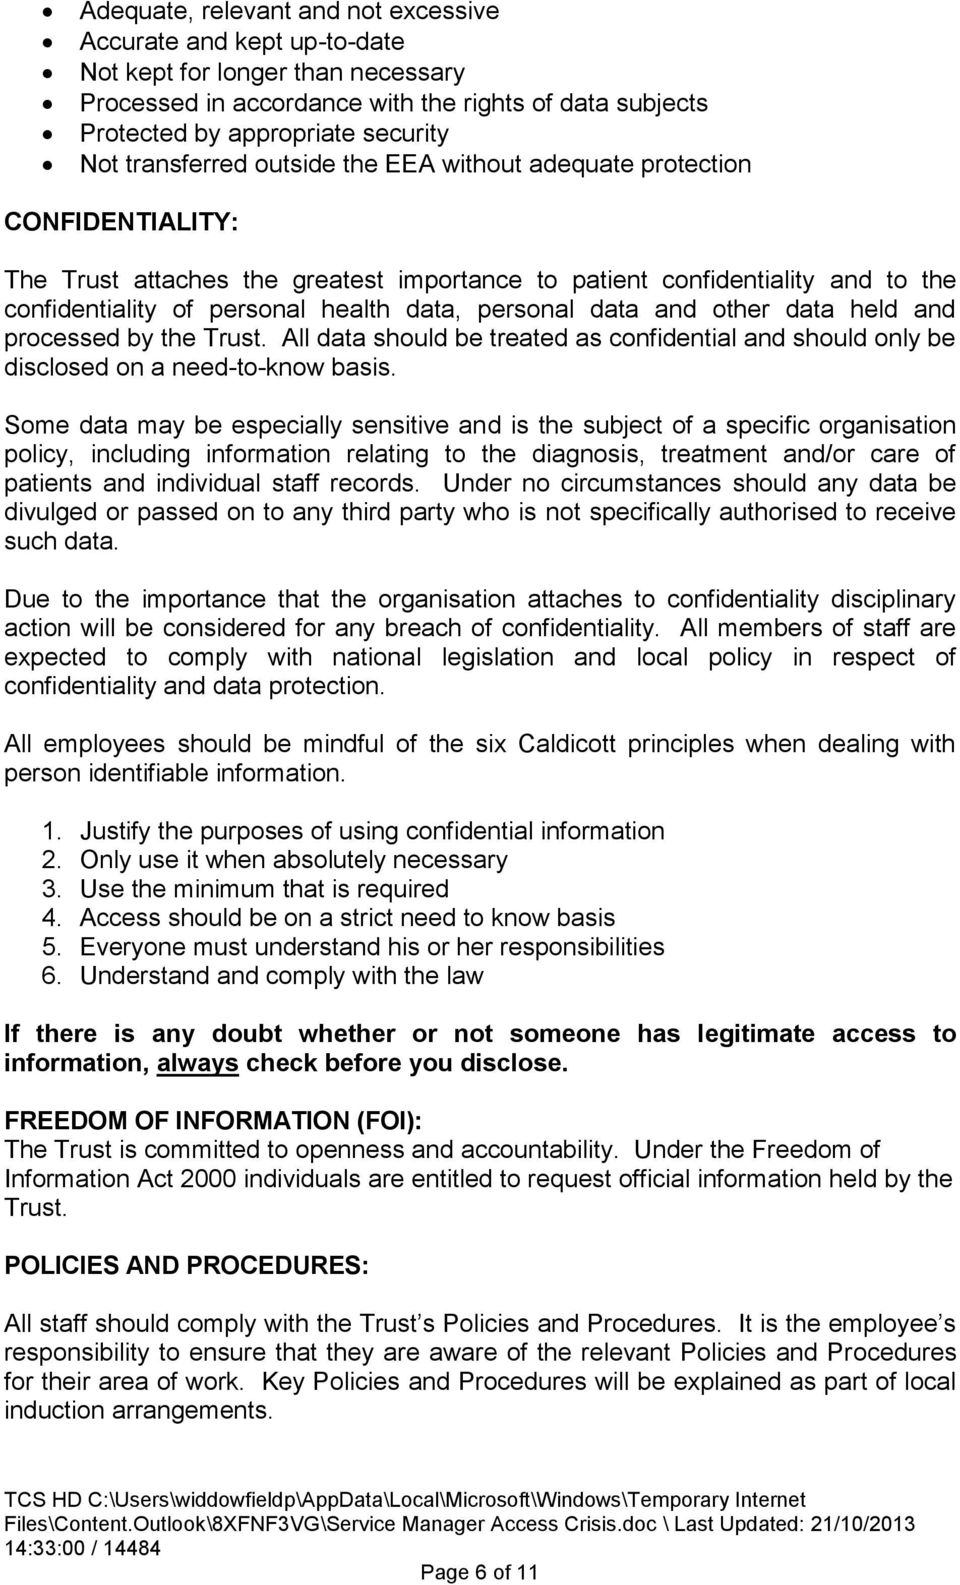 personal data and other data held and processed by the Trust. All data should be treated as confidential and should only be disclosed on a need-to-know basis.